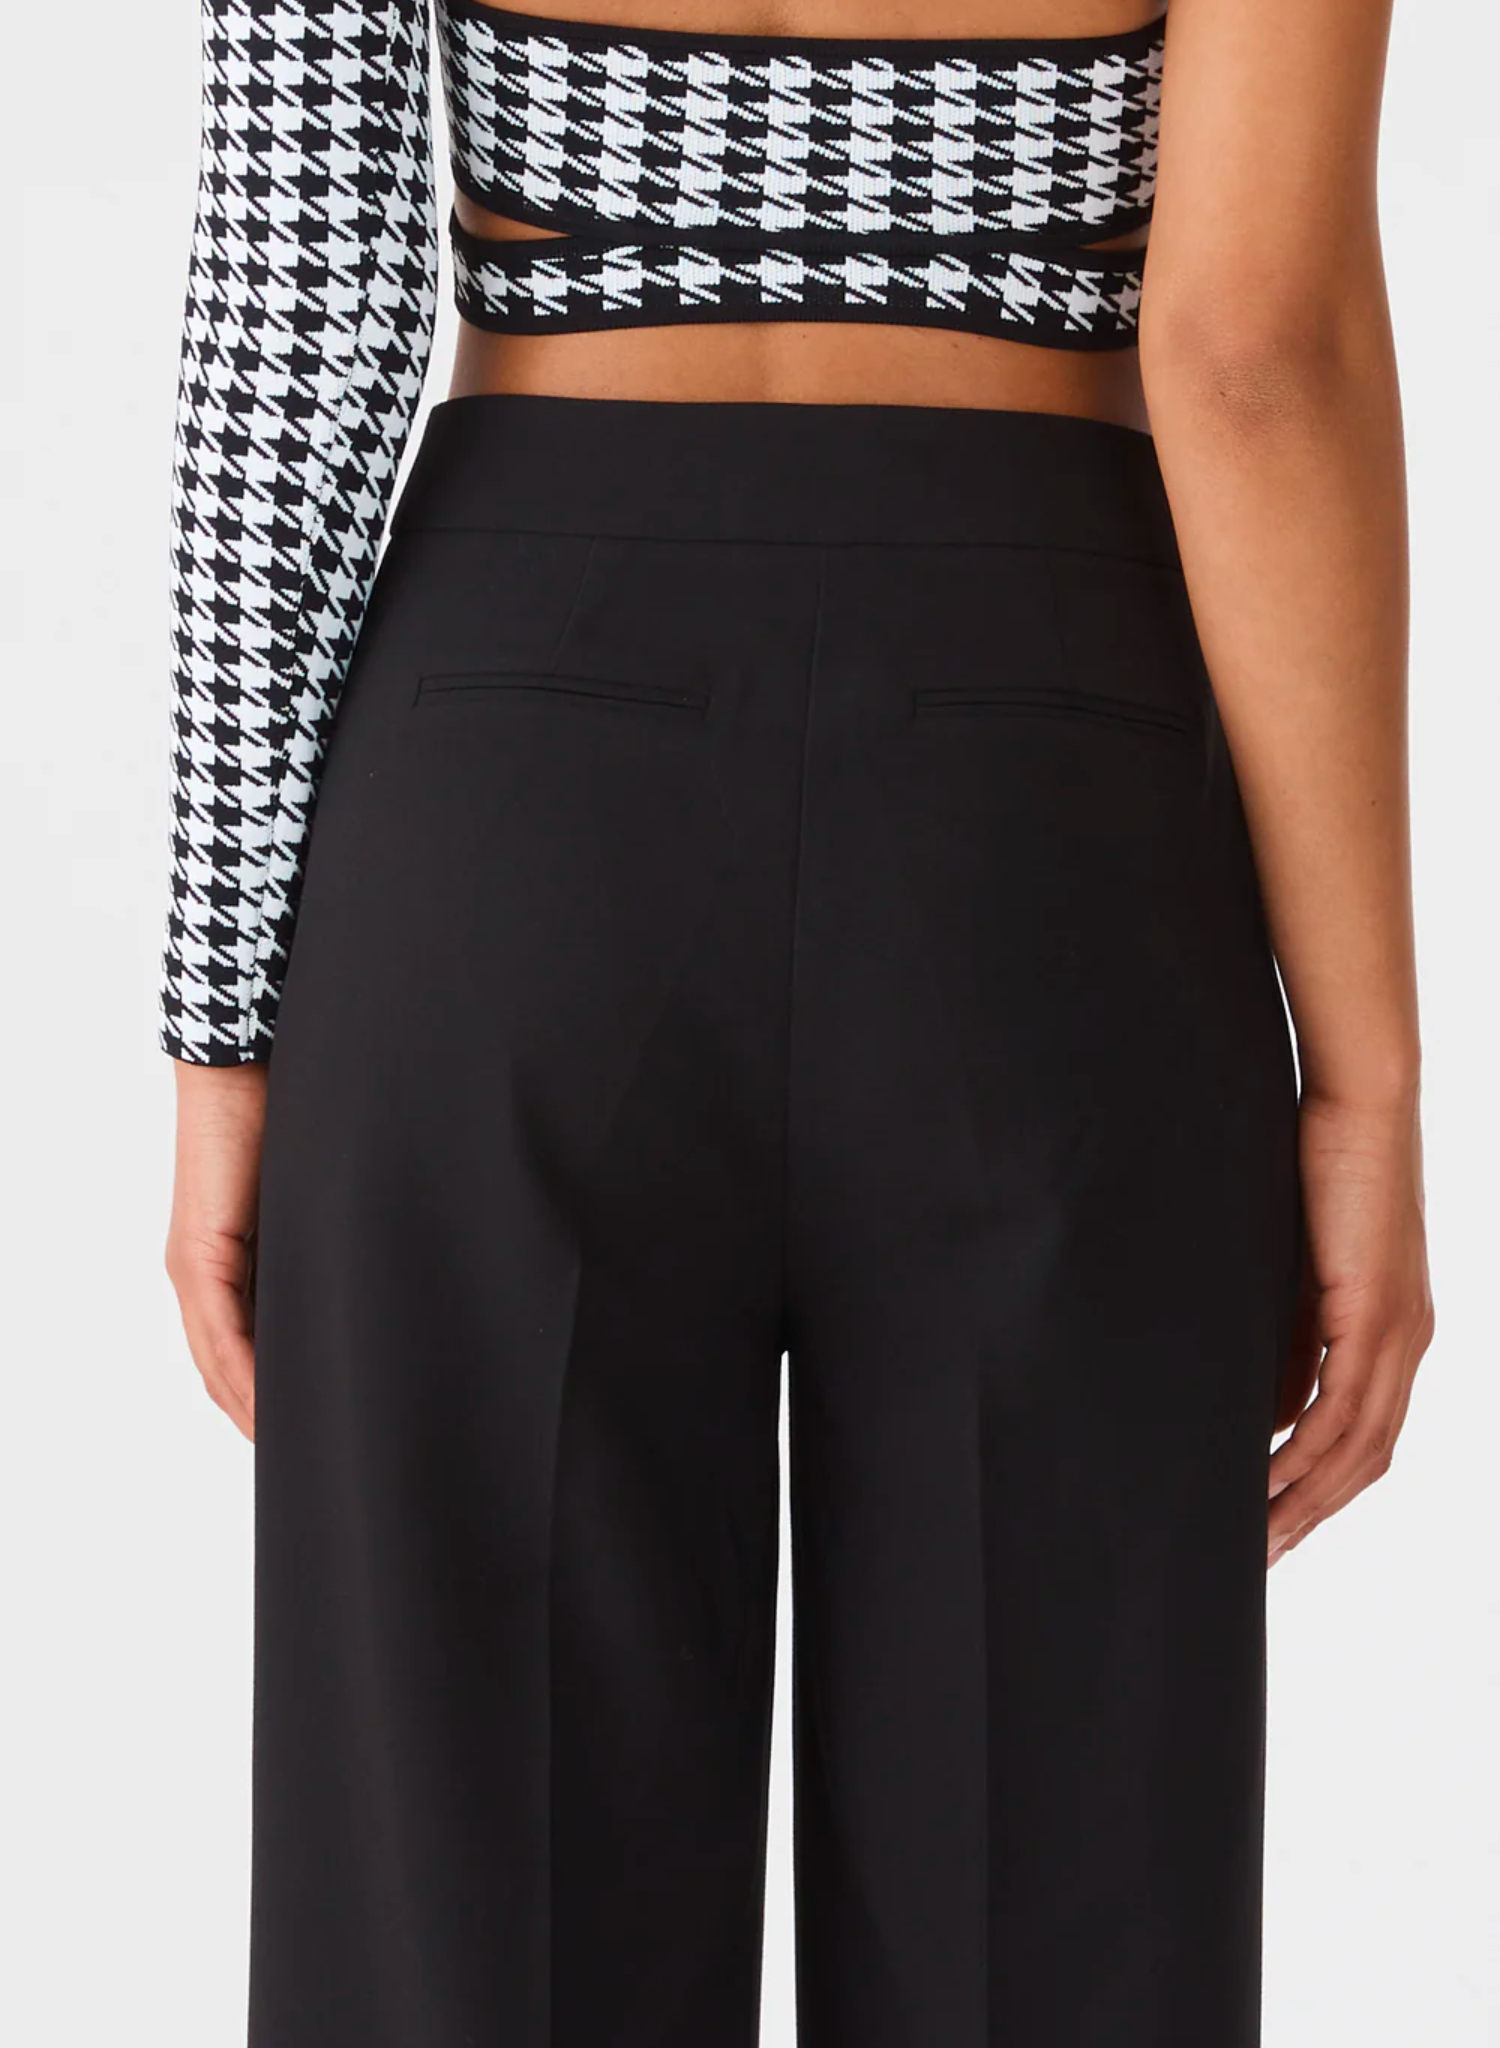 Classic high waist tailored pant, Medium weight woven suiting fabrication without stretch, Pleat front detail, Side pockets, Clasp closure at waist band, zip fly Faux pocket detail at the back 